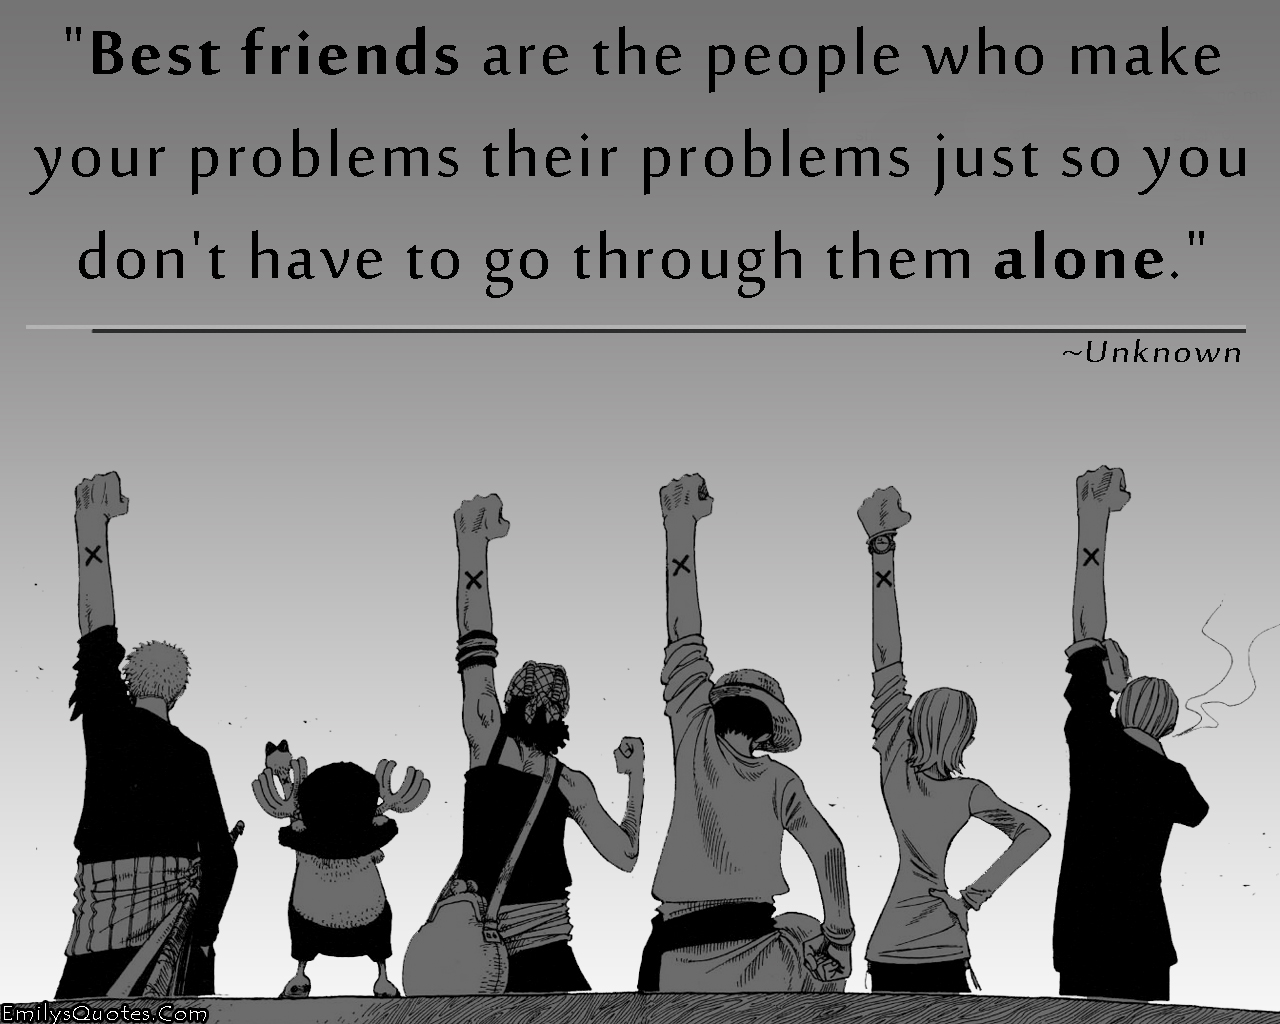 Best friends are the people who make your problems their problems just so you don’t have to go through them alone